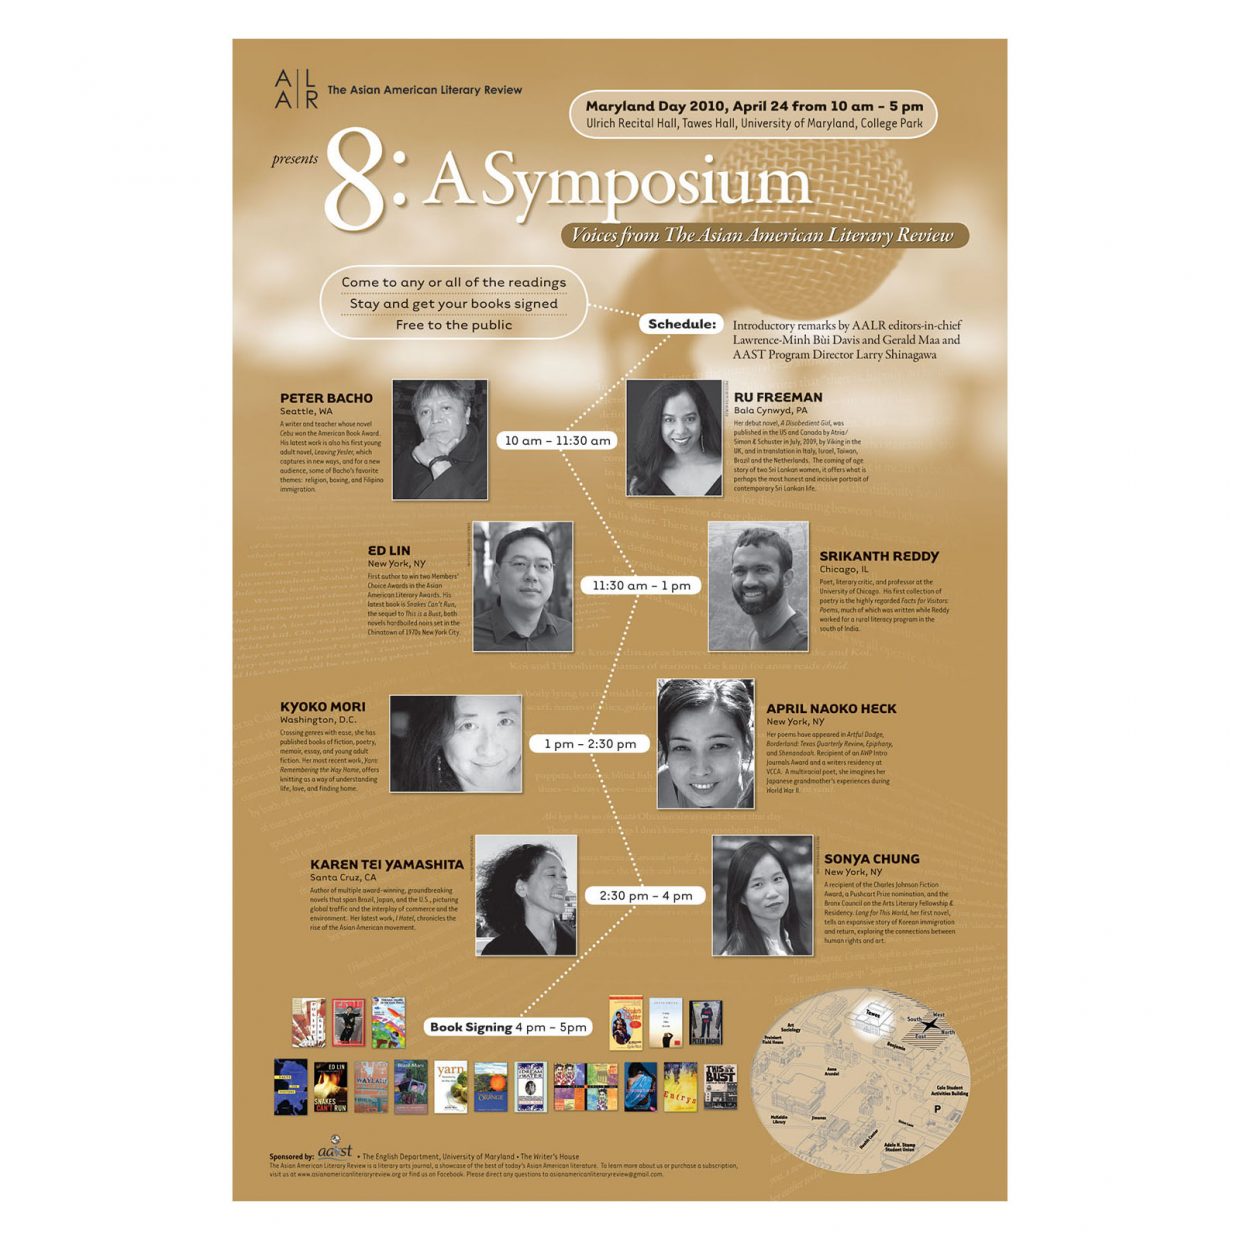 Poster for writers' symposium presented by The Asian American Literary Review